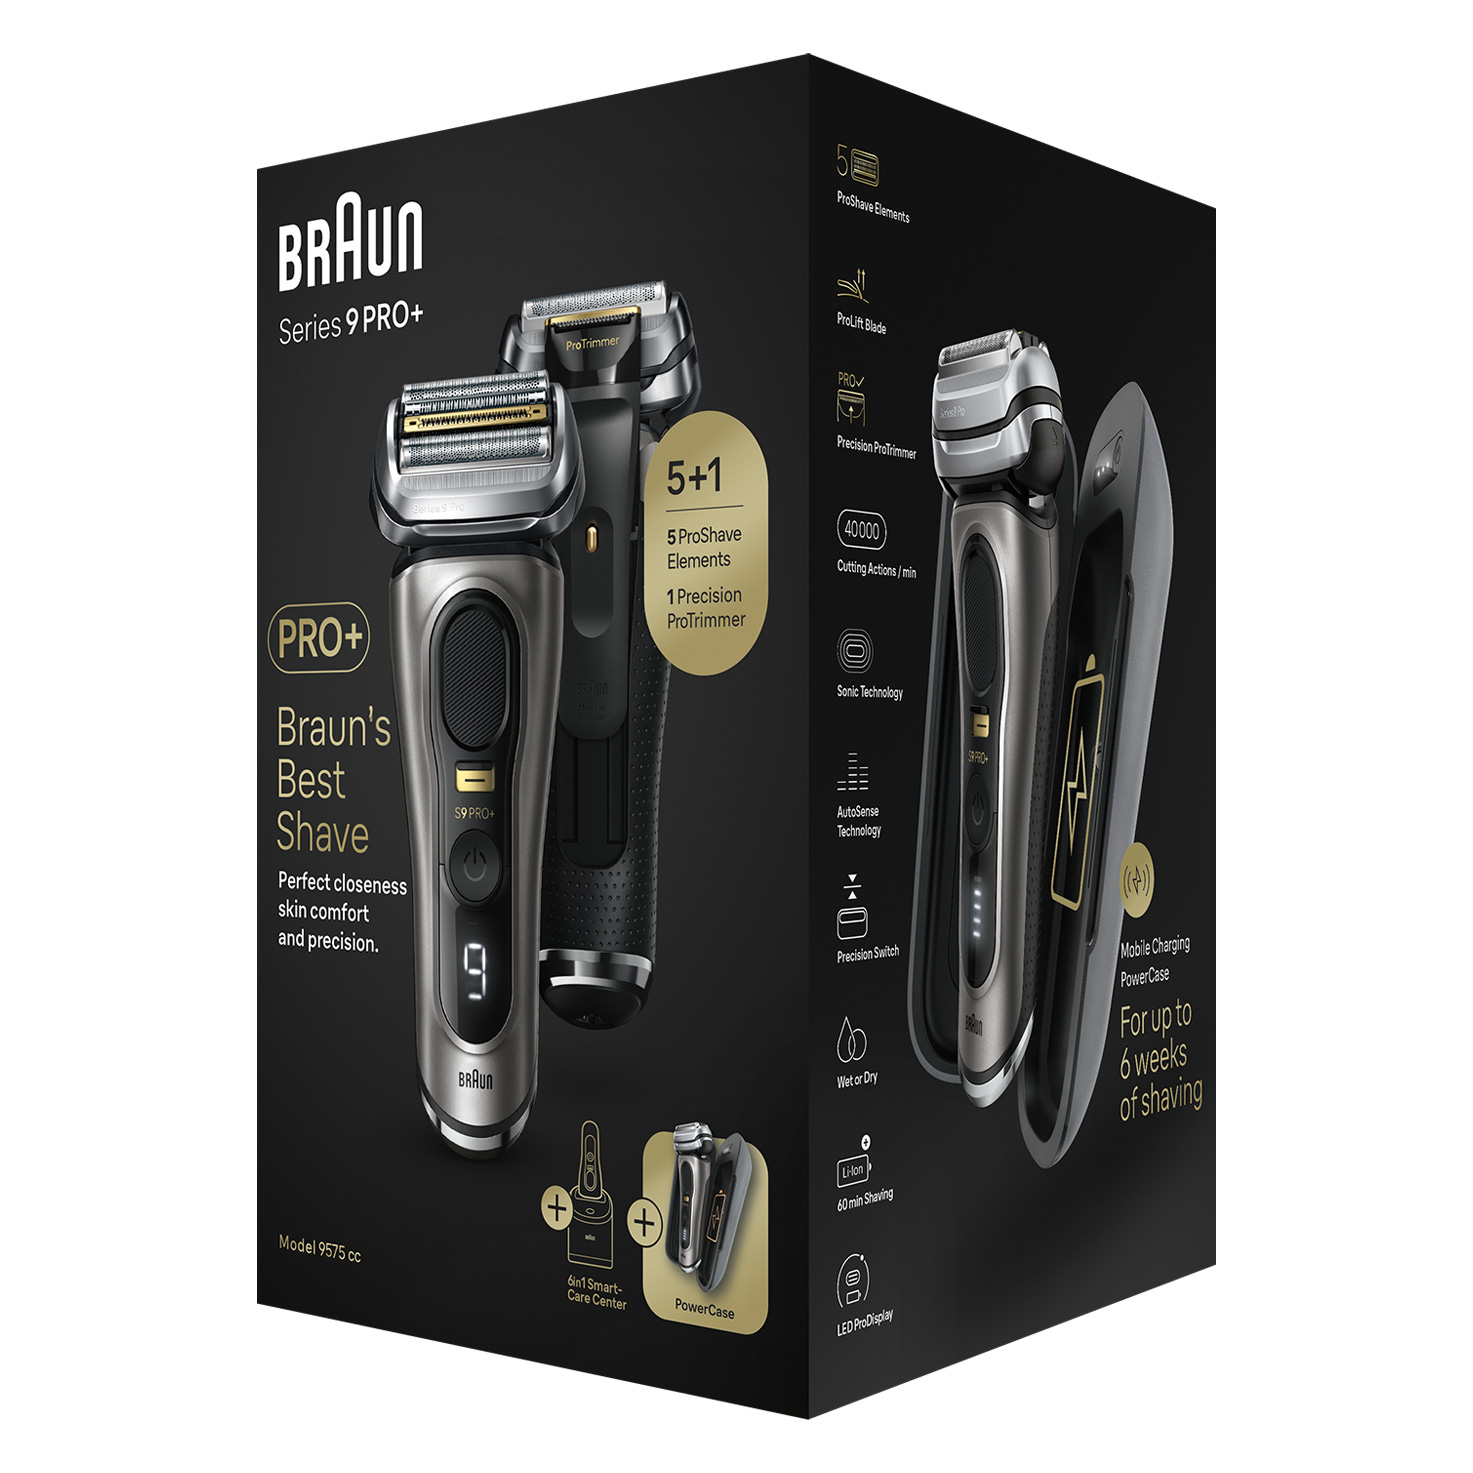 Braun | UK 9 Electric Braun Pro+ Series ProTrimmer Shaver with